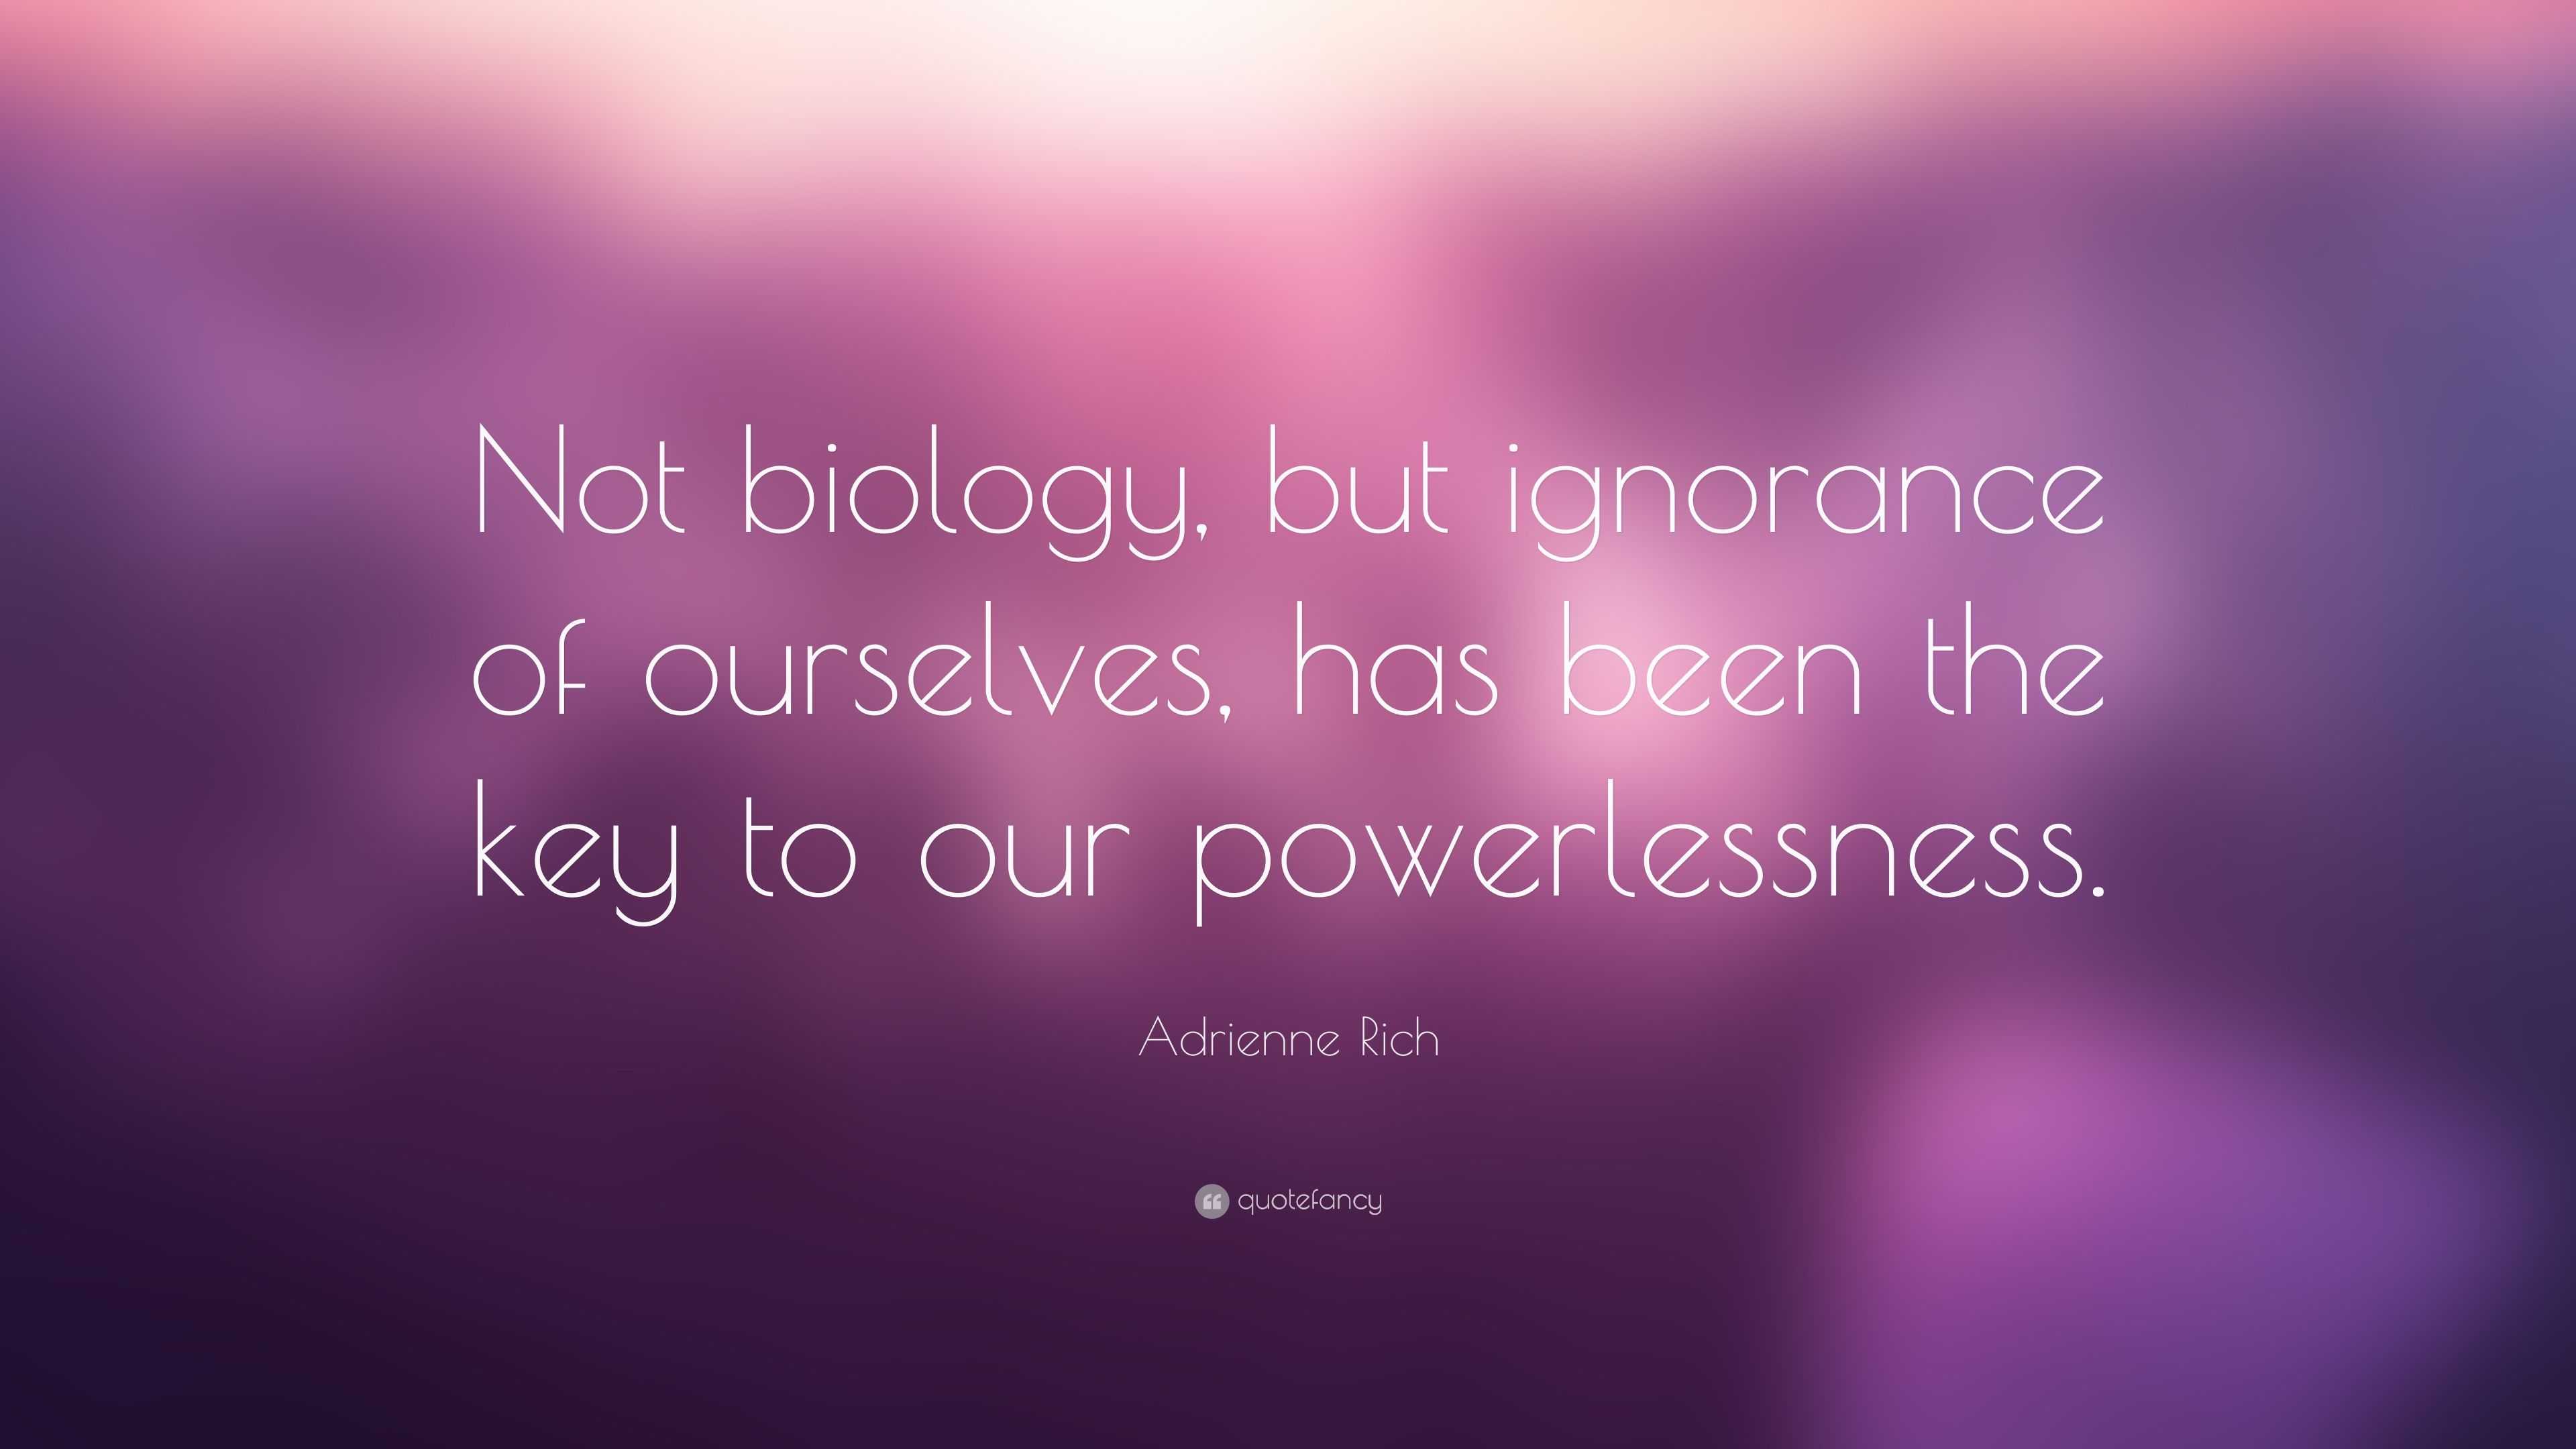 Adrienne Rich Quote: “Not biology, but ignorance of ourselves, has been ...